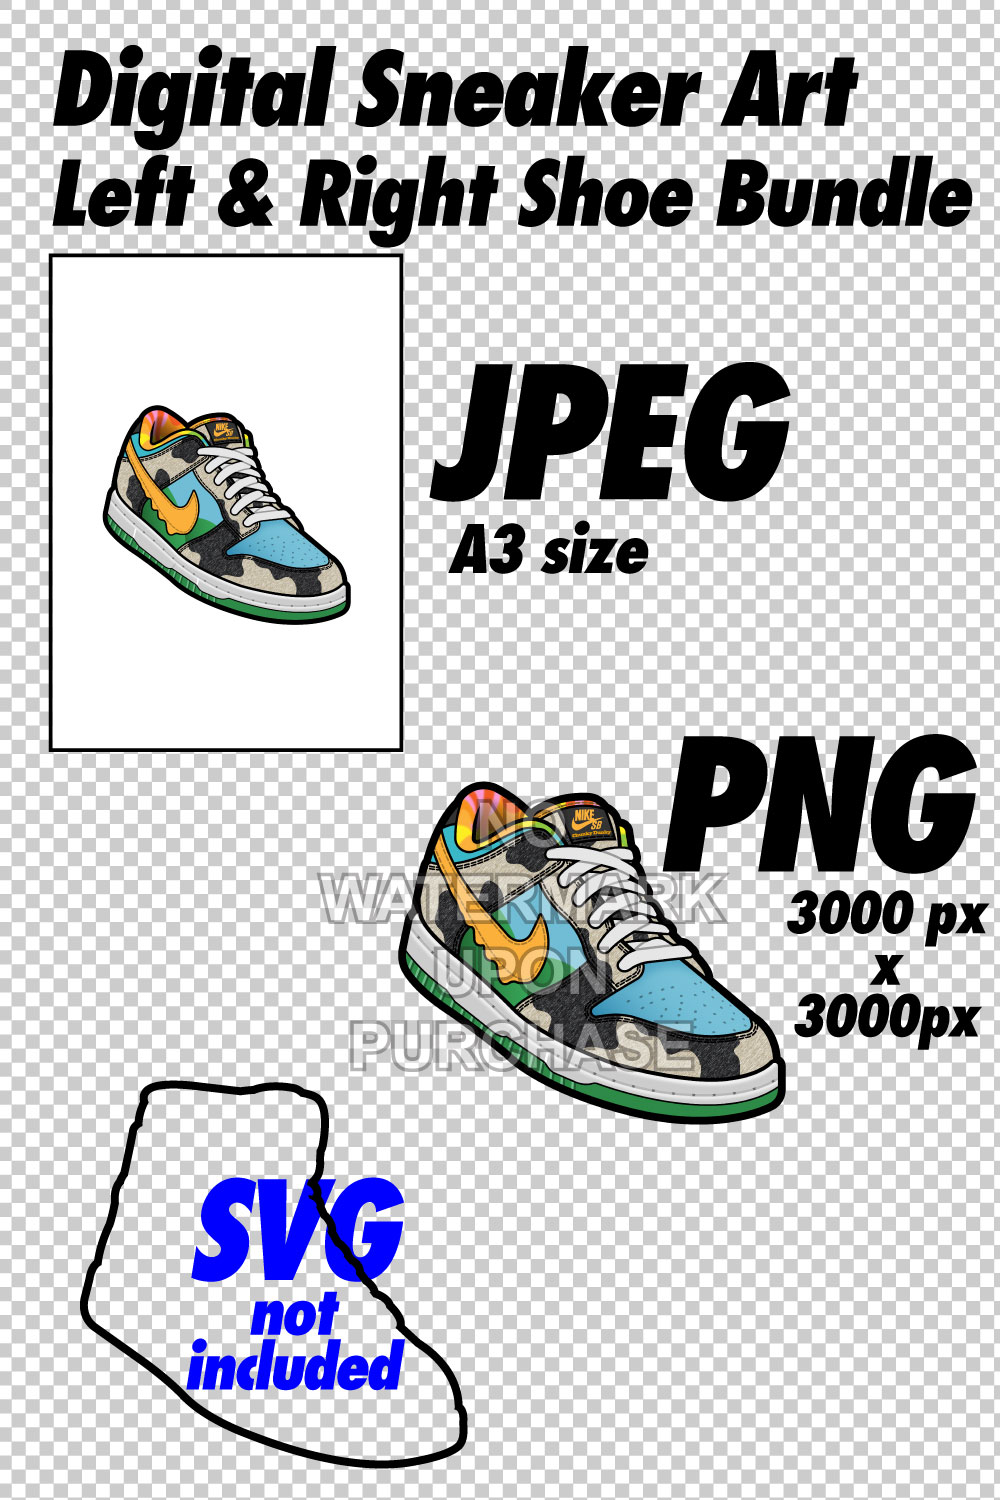 Dunk Low Chunky Dunky JPEG PNG Sneaker Art Right & Left Shoe Bundle pinterest preview image.